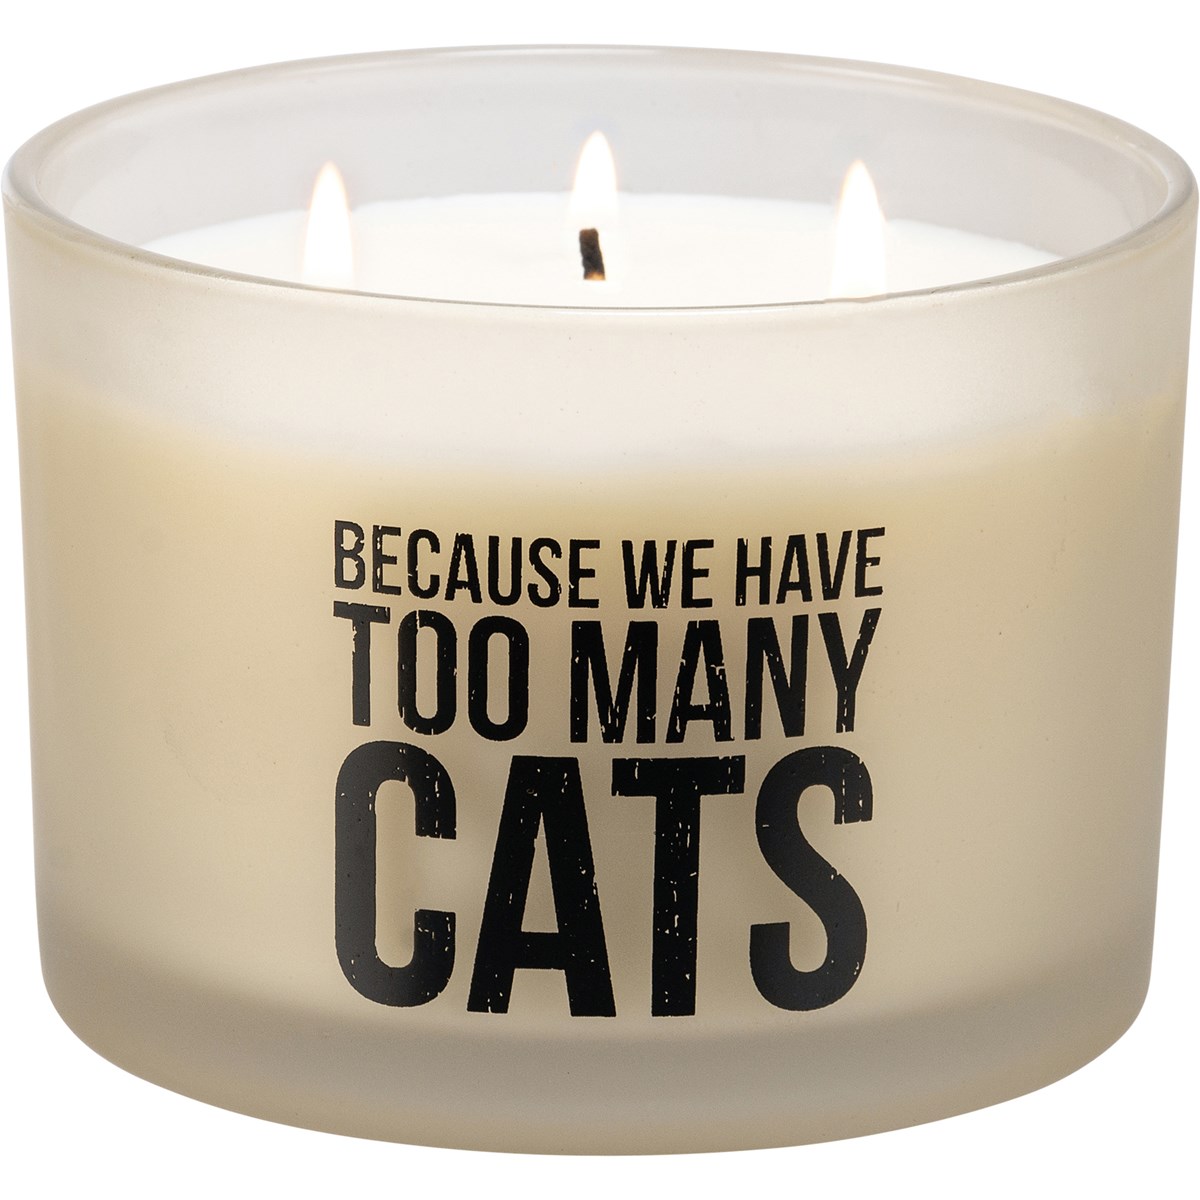 Because We Have Too Many Cats Jar Candle - Soy Wax, Glass, Cotton